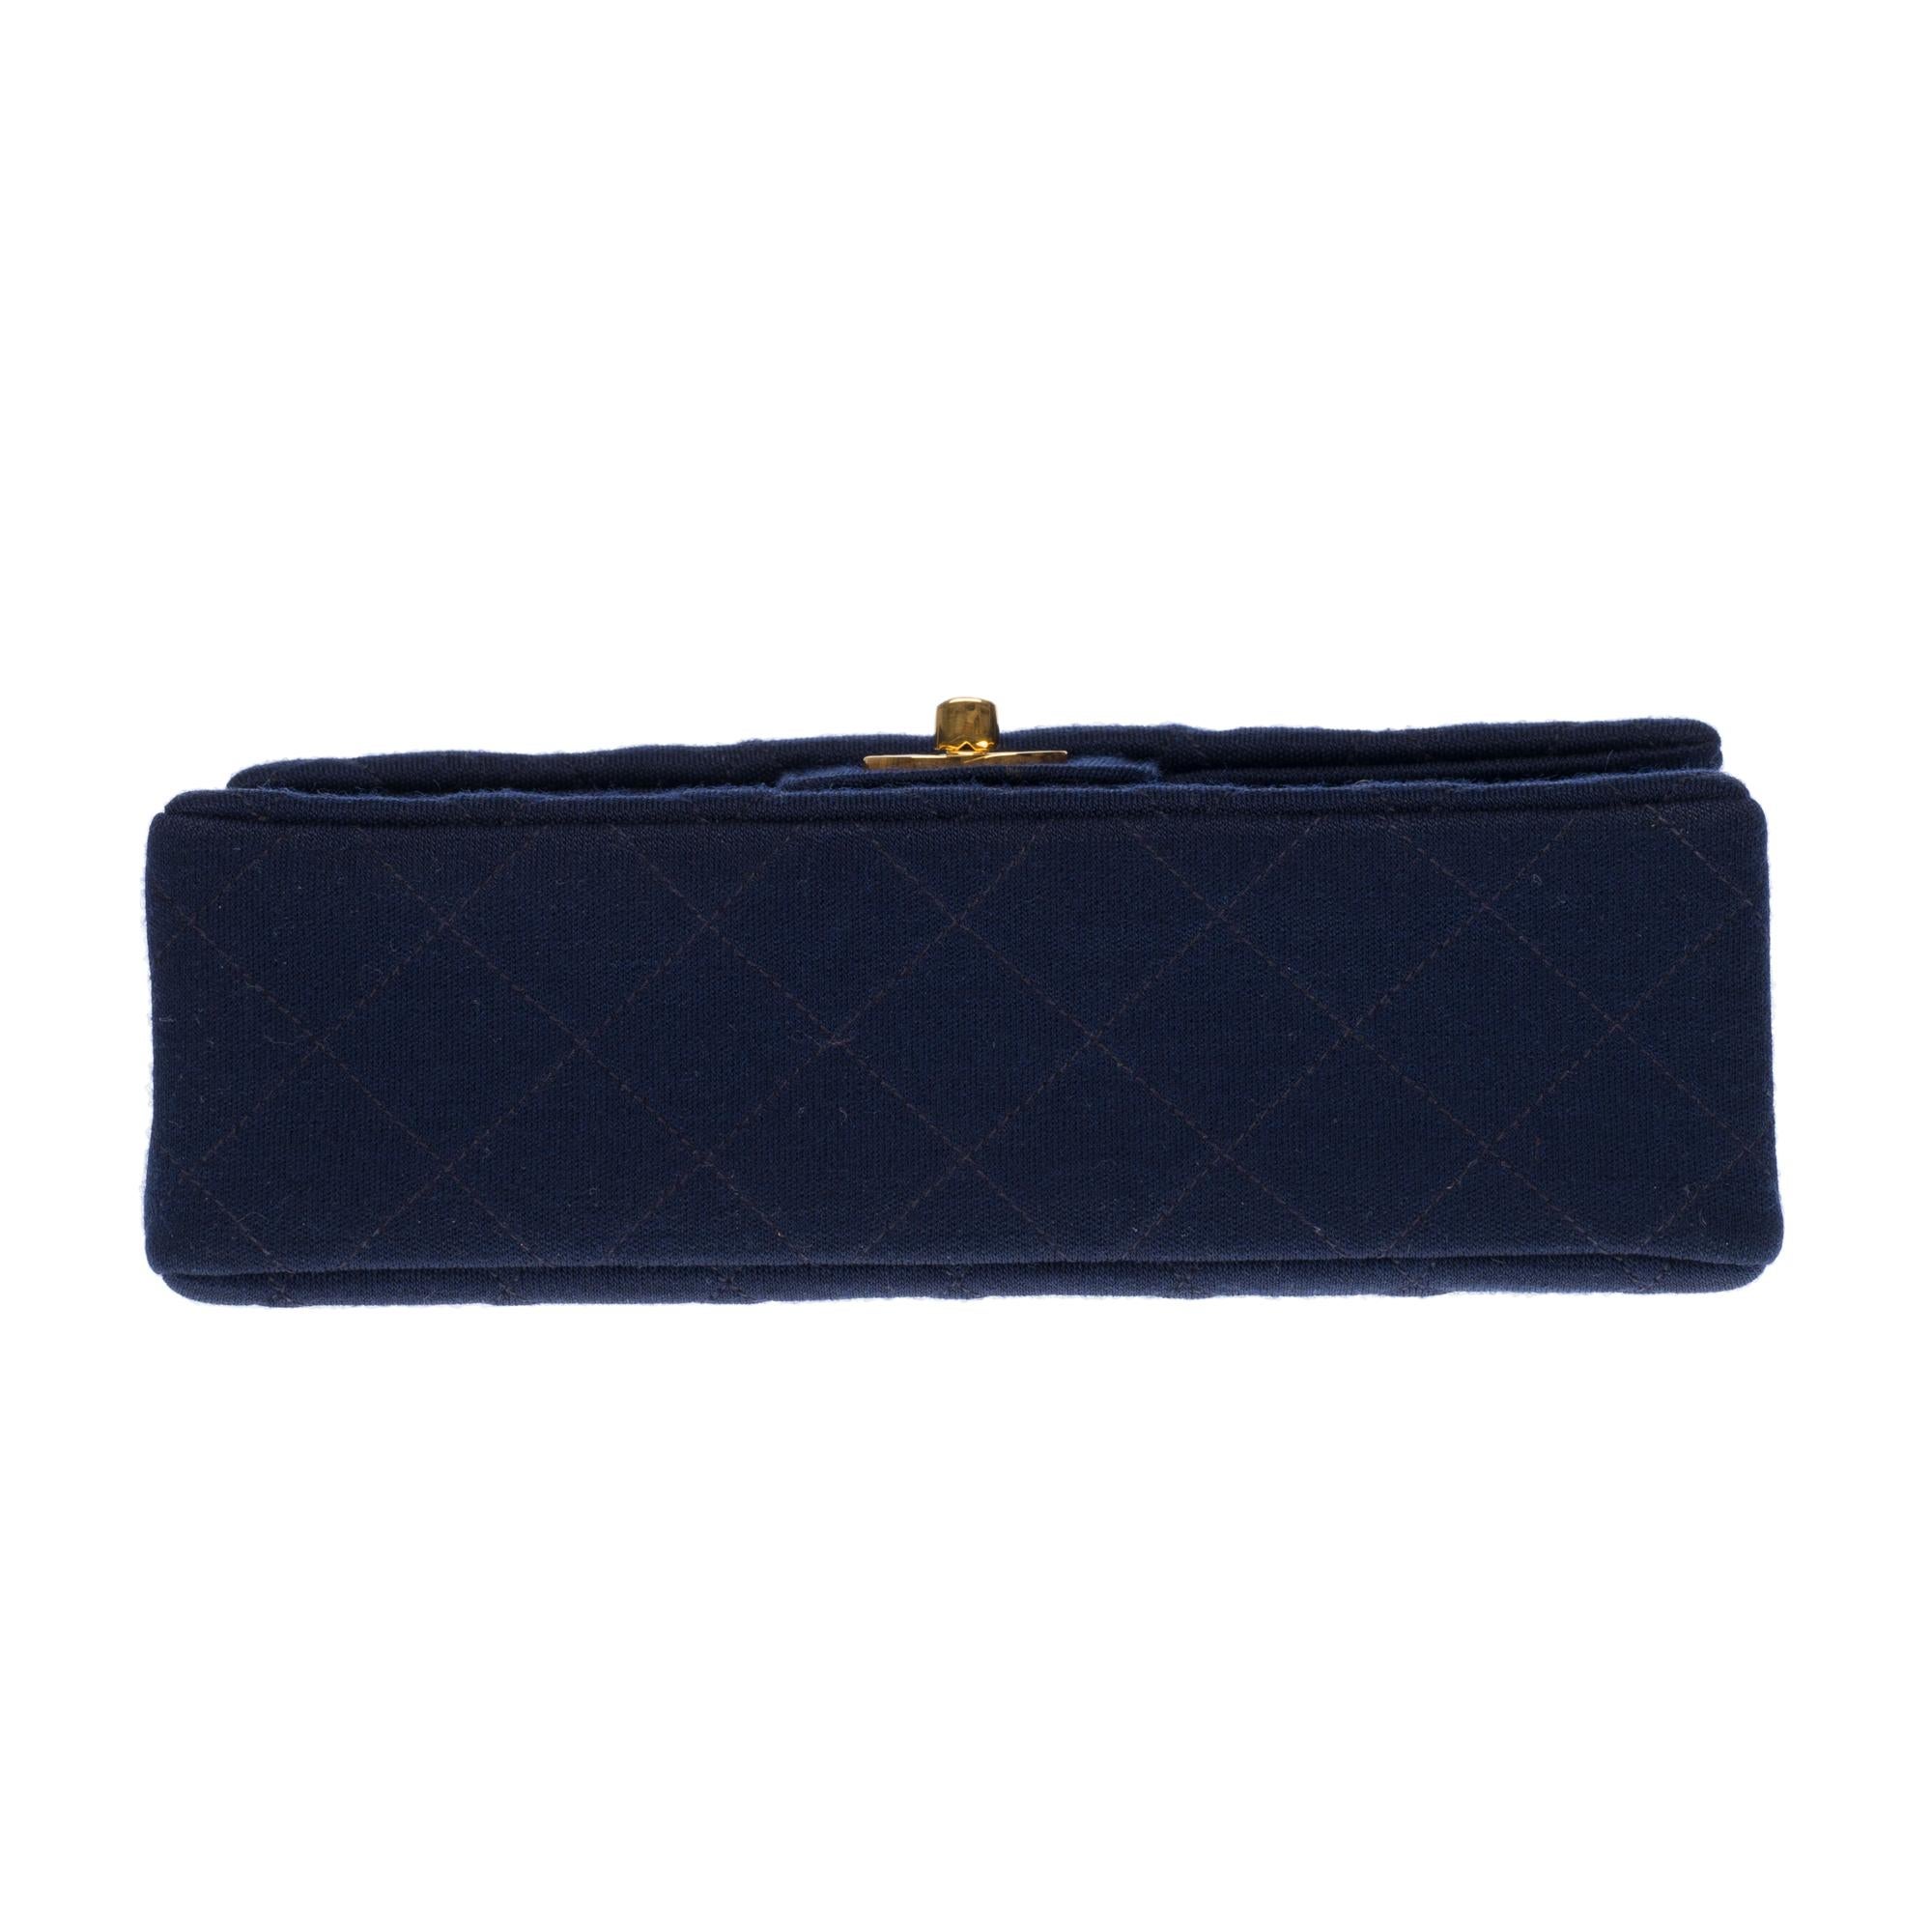 Chanel Timeless shoulder bag in navy blue quilted jersey with gold hardware 1